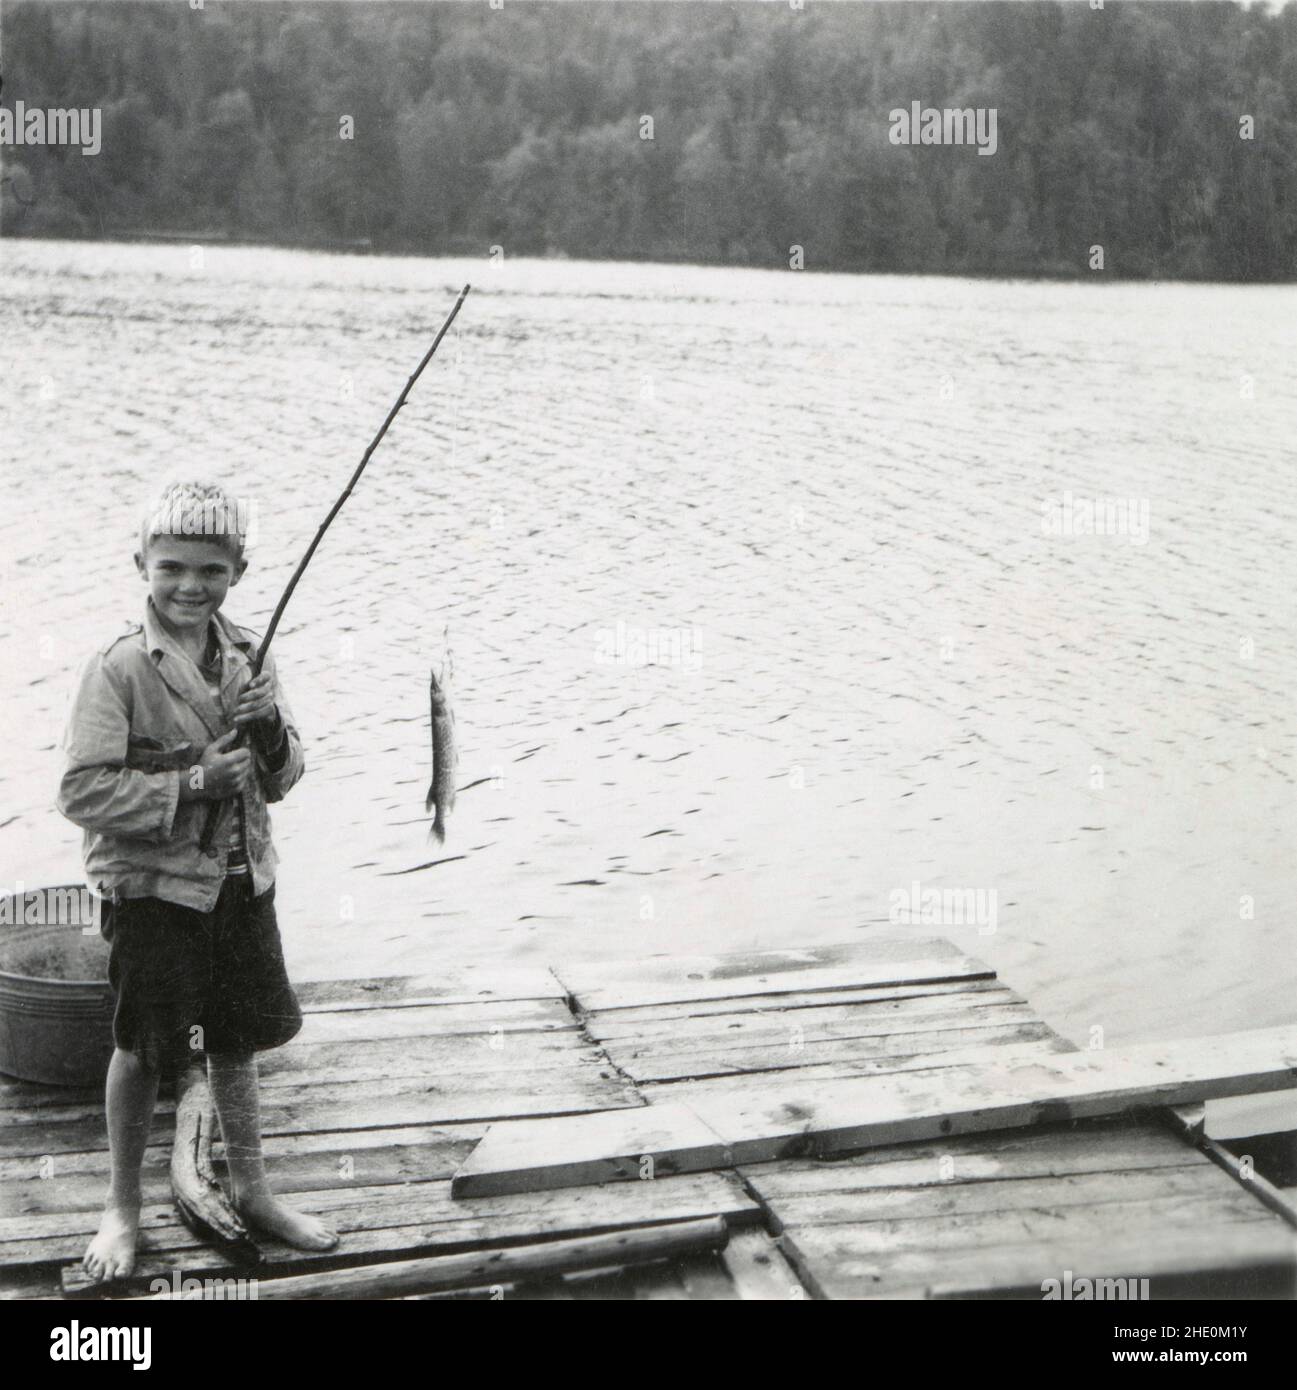 Antique circa 1930 photograph, boy with stick fishing pole on dock